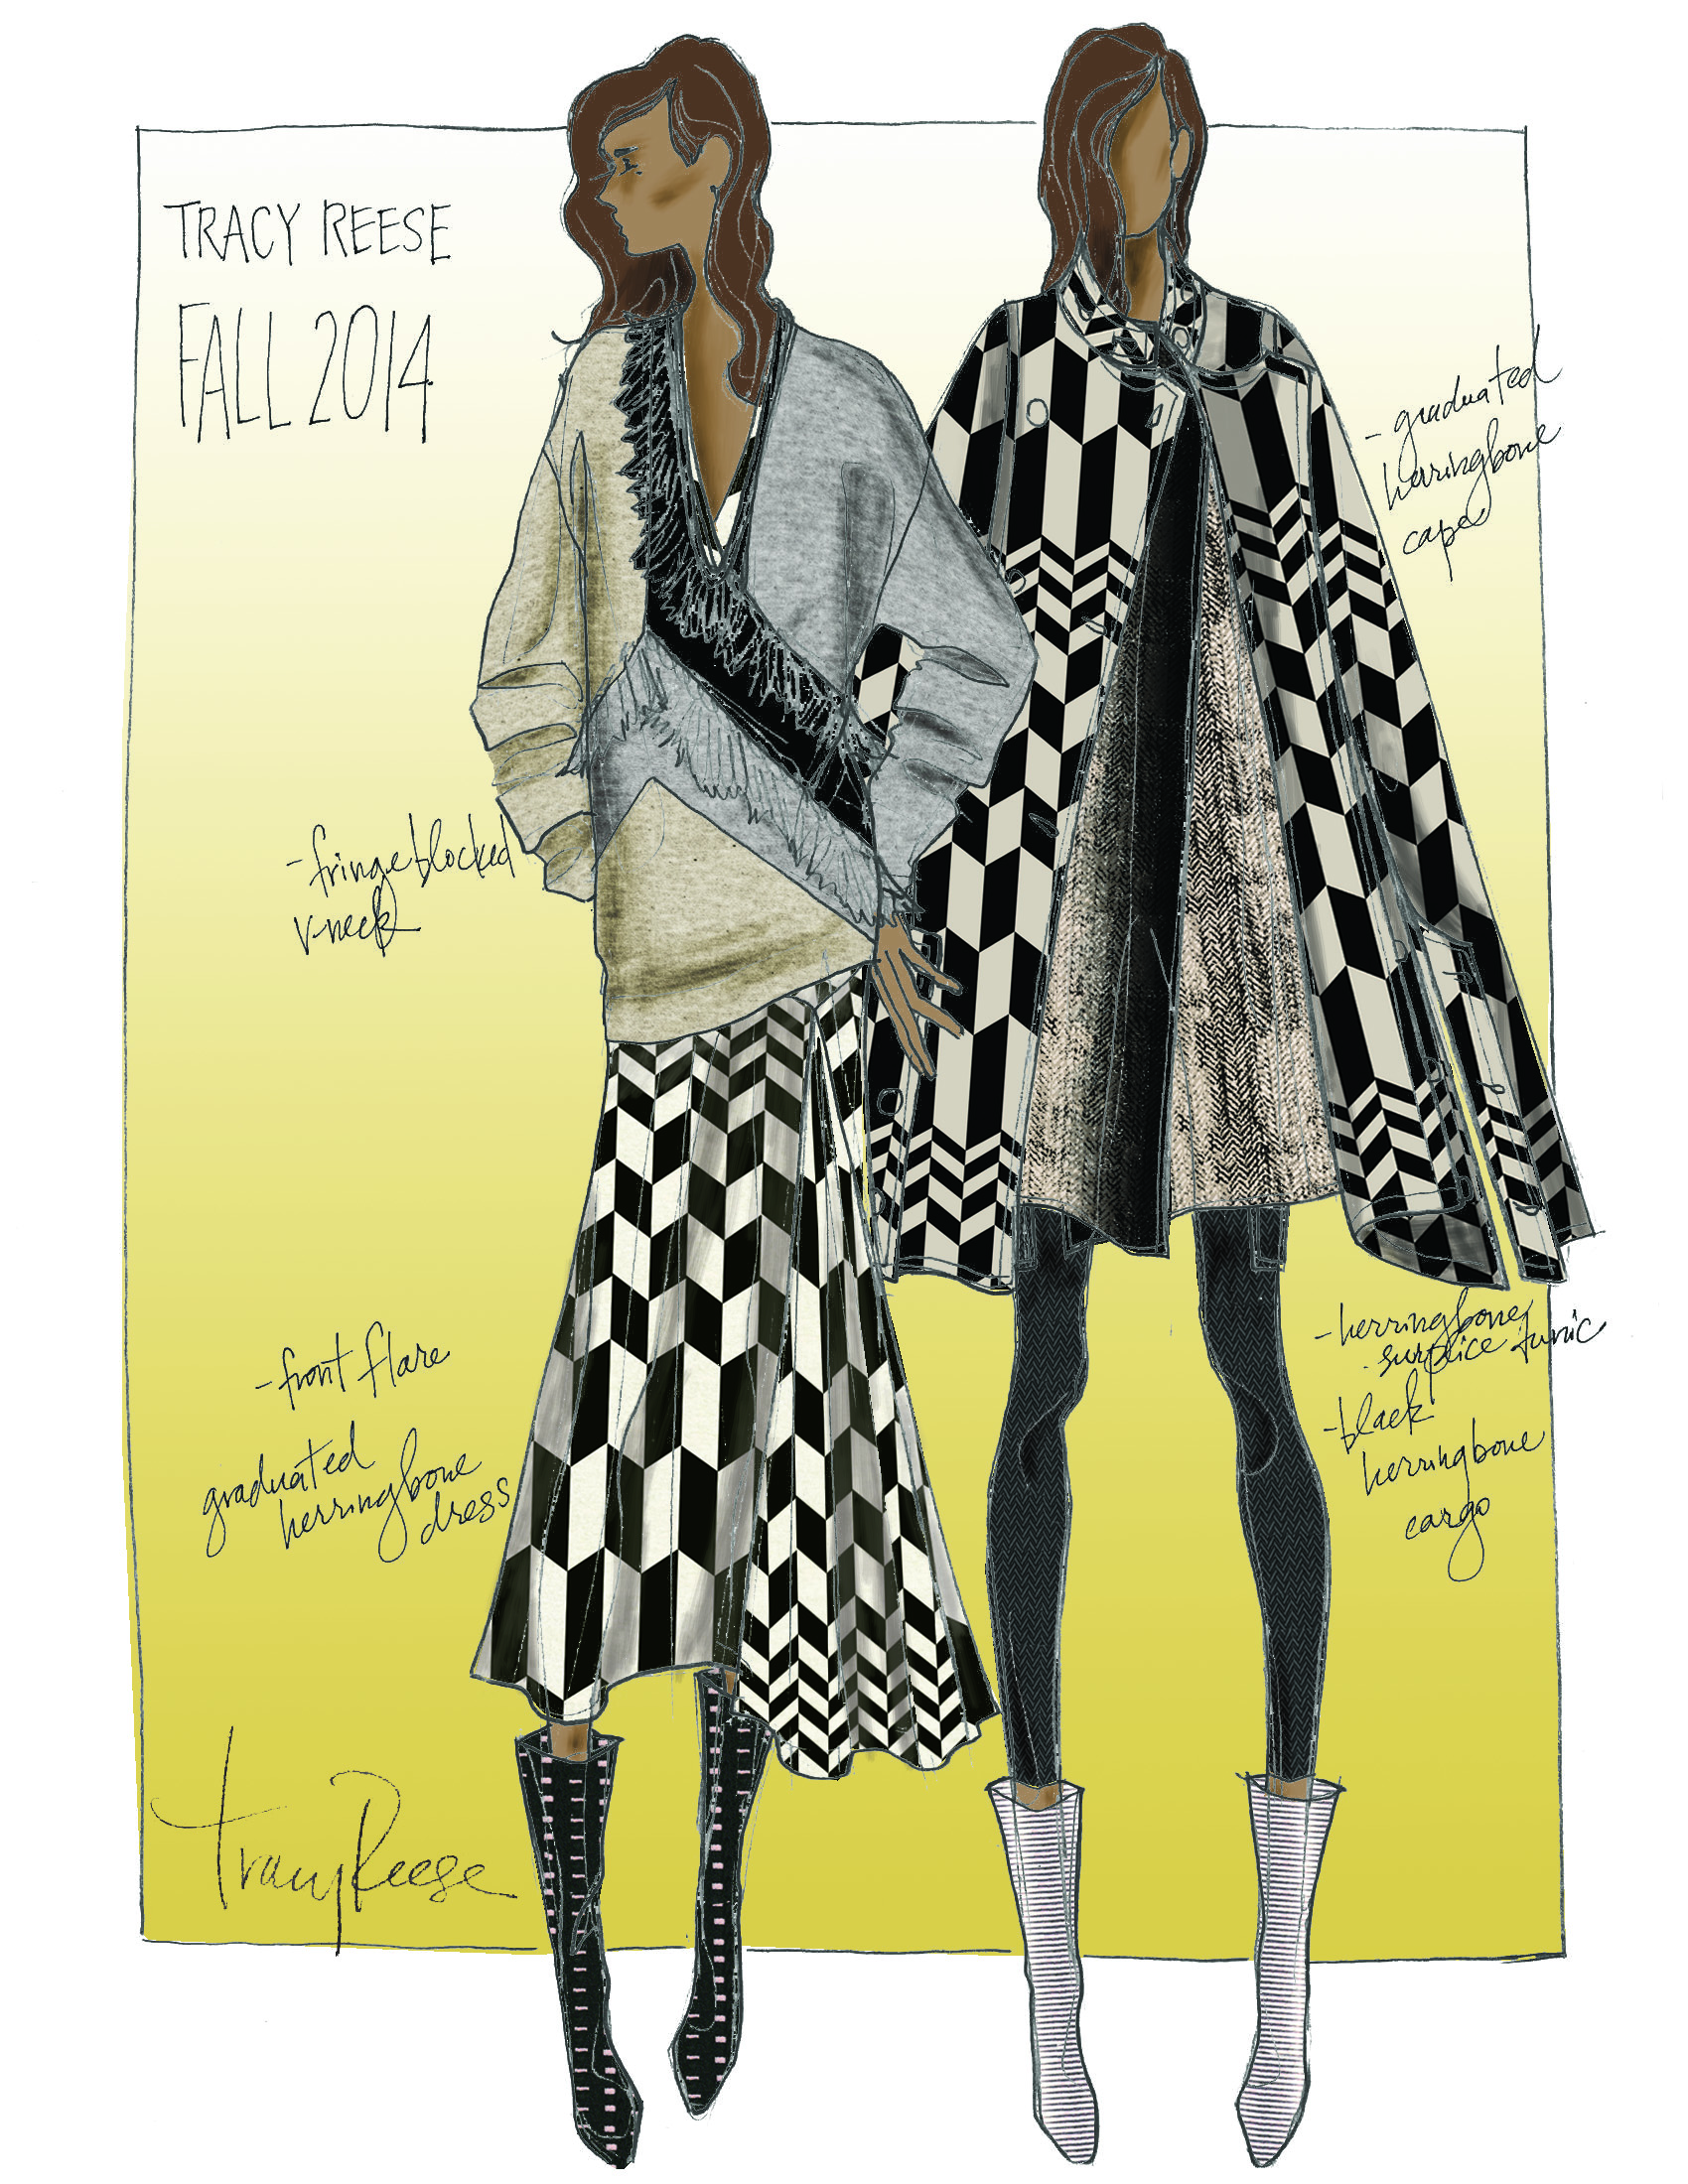 A sketch from designer Tracy Reese's Fall 2014 collection